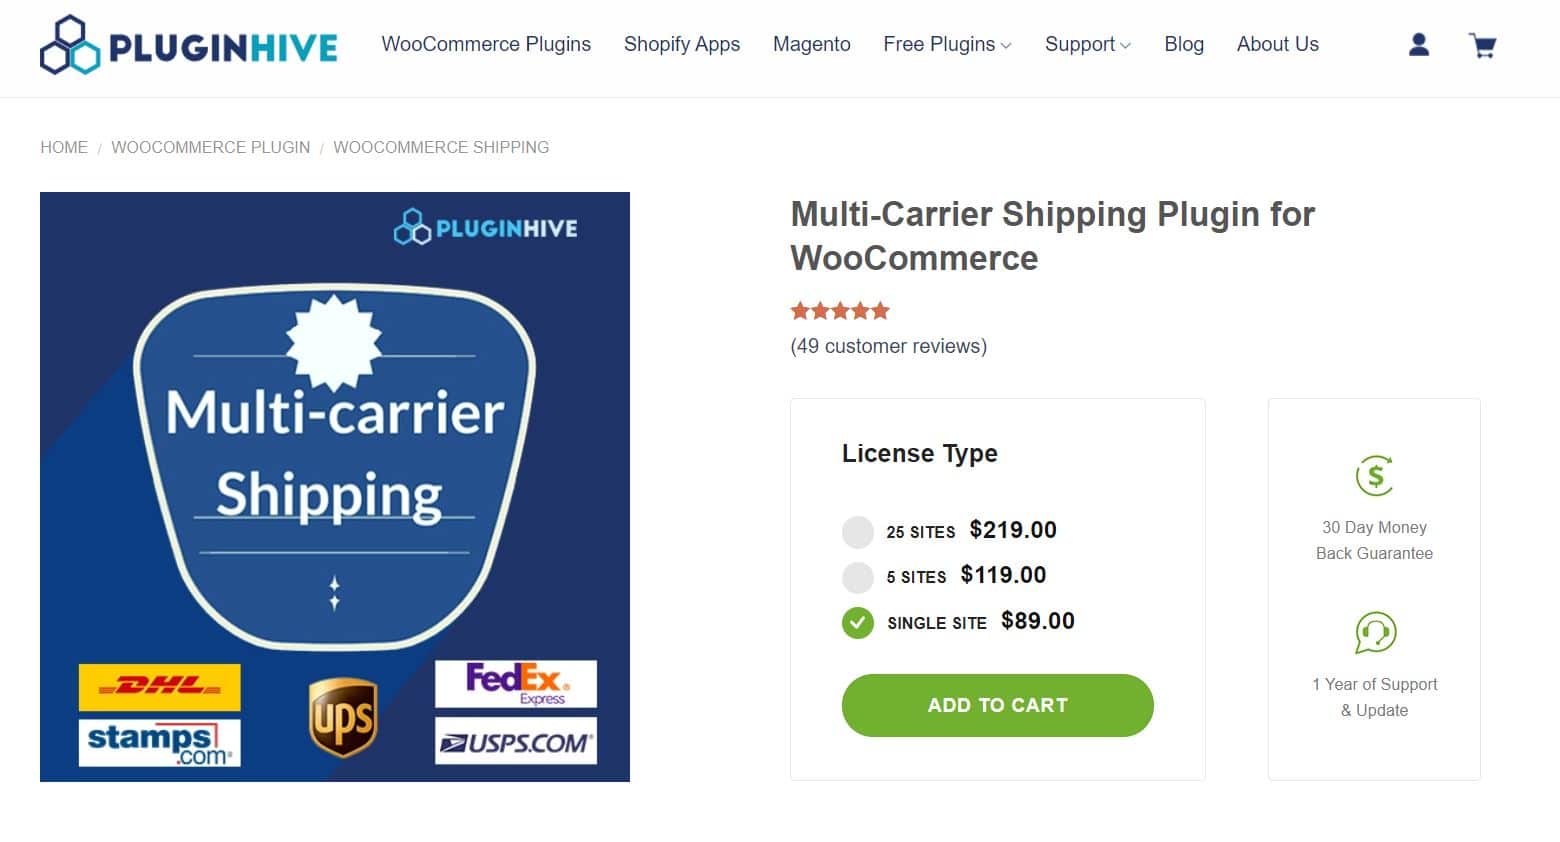 Multi-Carrier Shipping for WooCommerce.